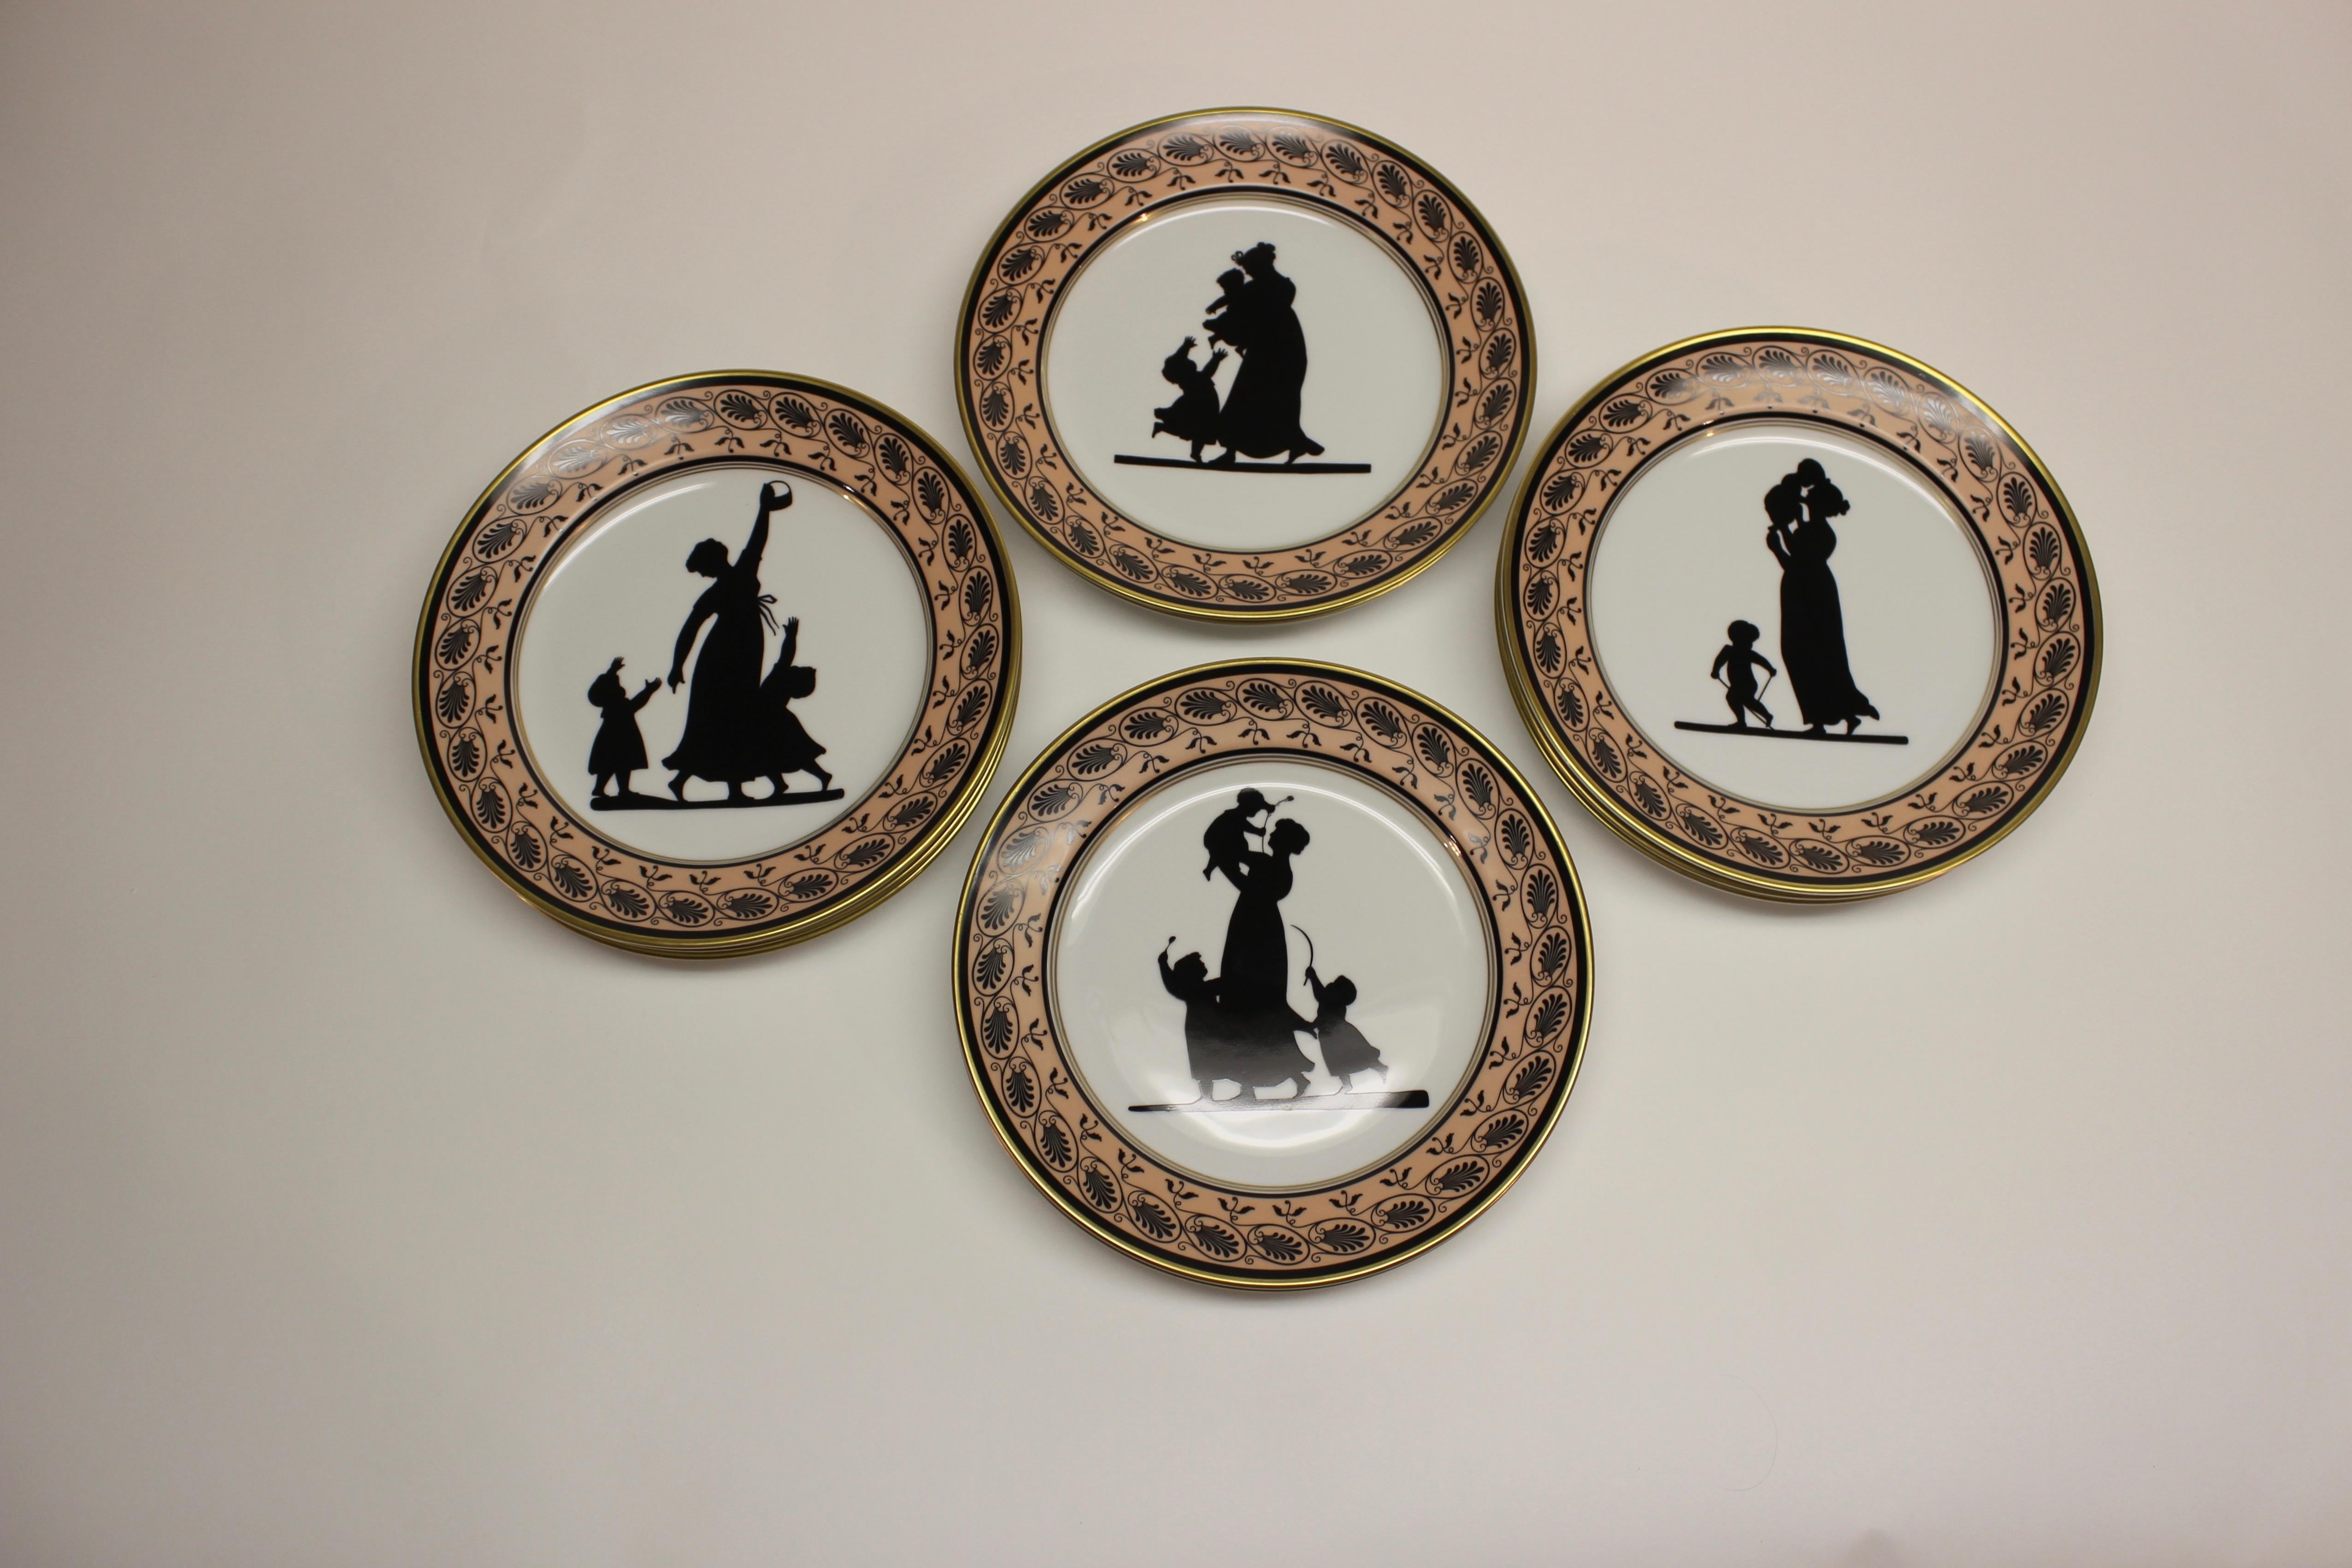 Vintage Mottahedeh Vista Alegre silhouette dessert plates with a decorative pink and black border. The plates are Motthahedeh copies of an early 19th century Coalport design featuring members of the Angerstein family in silhouette circa 1805-1810.